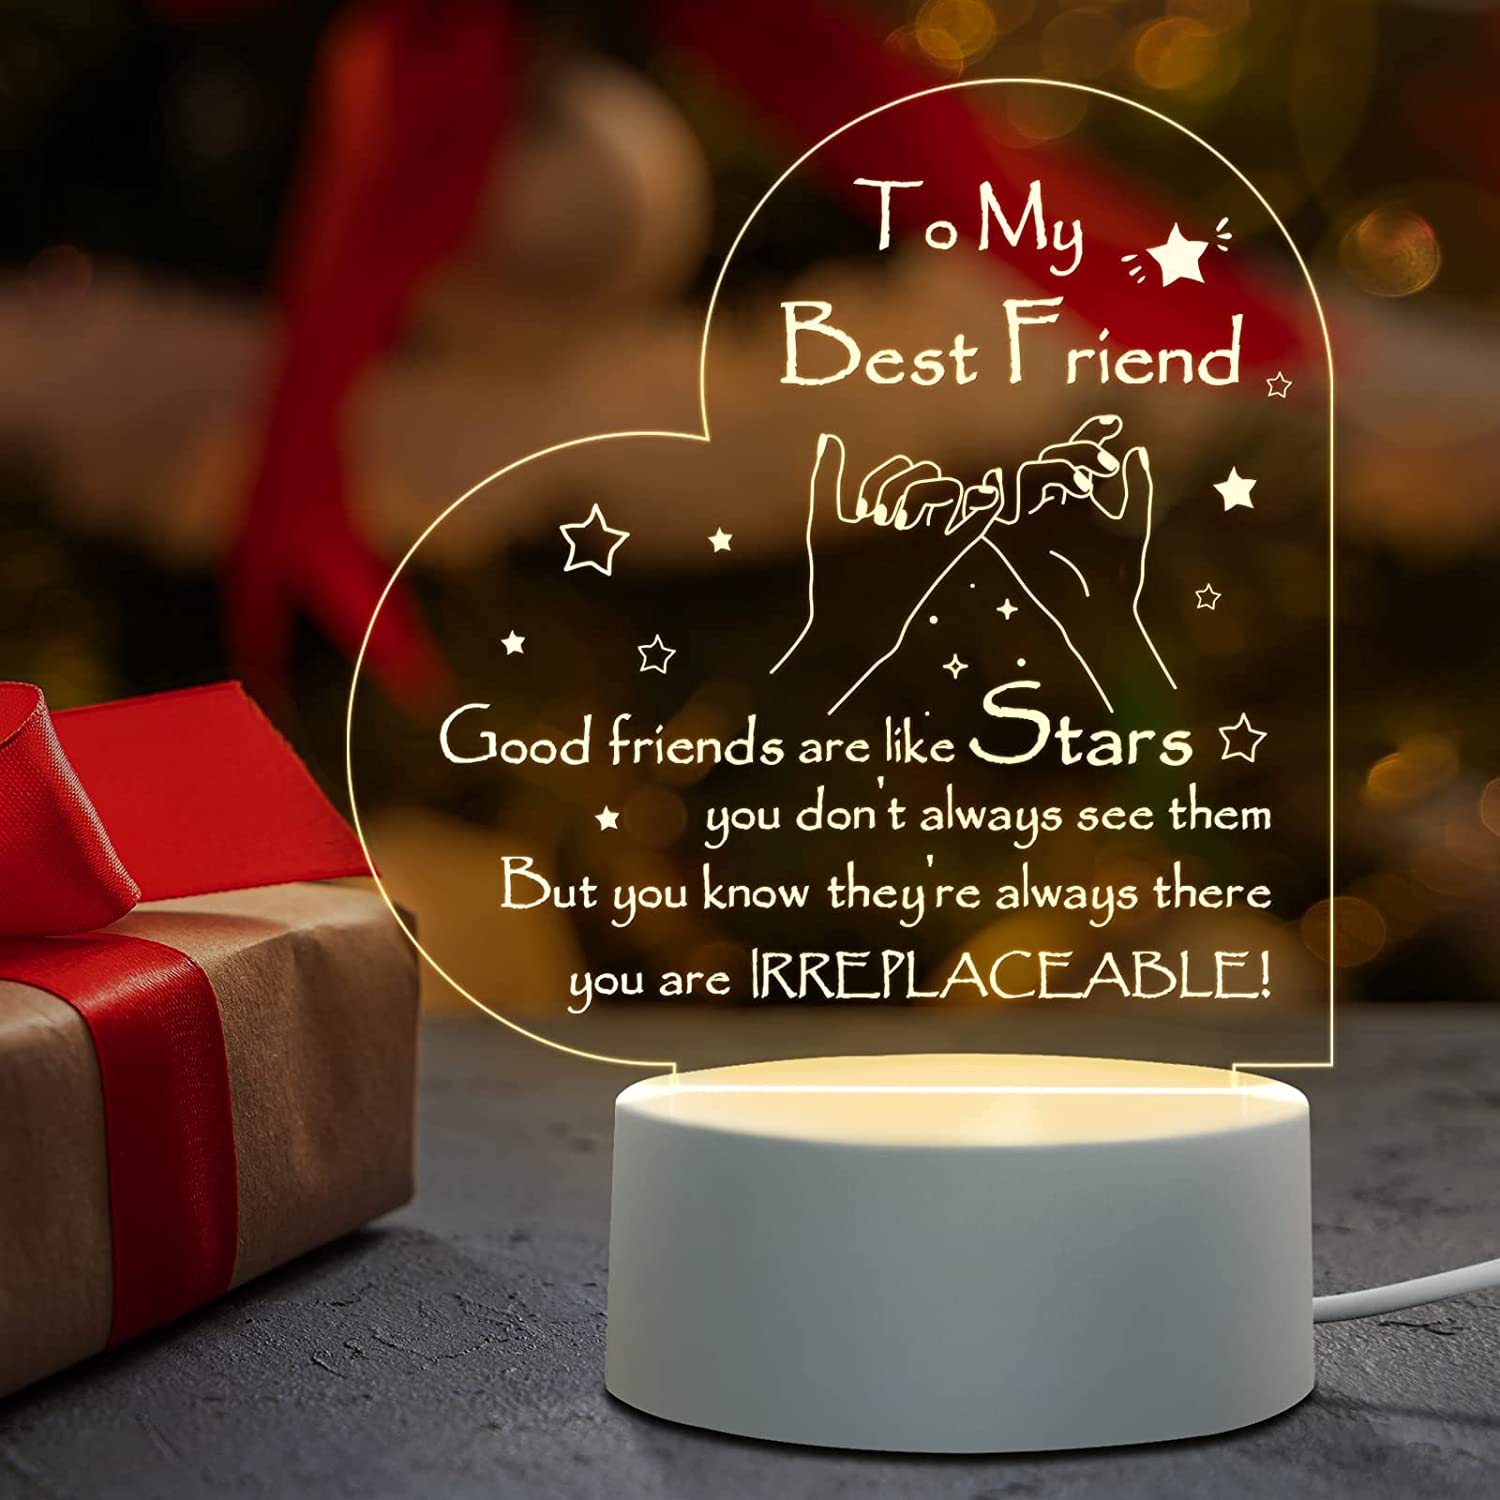 Friendship Gifts for Women Special Friends Gifts for Her Birthday, Christmas, Glass Heart Plaque with Best Friend Sayings Decorations